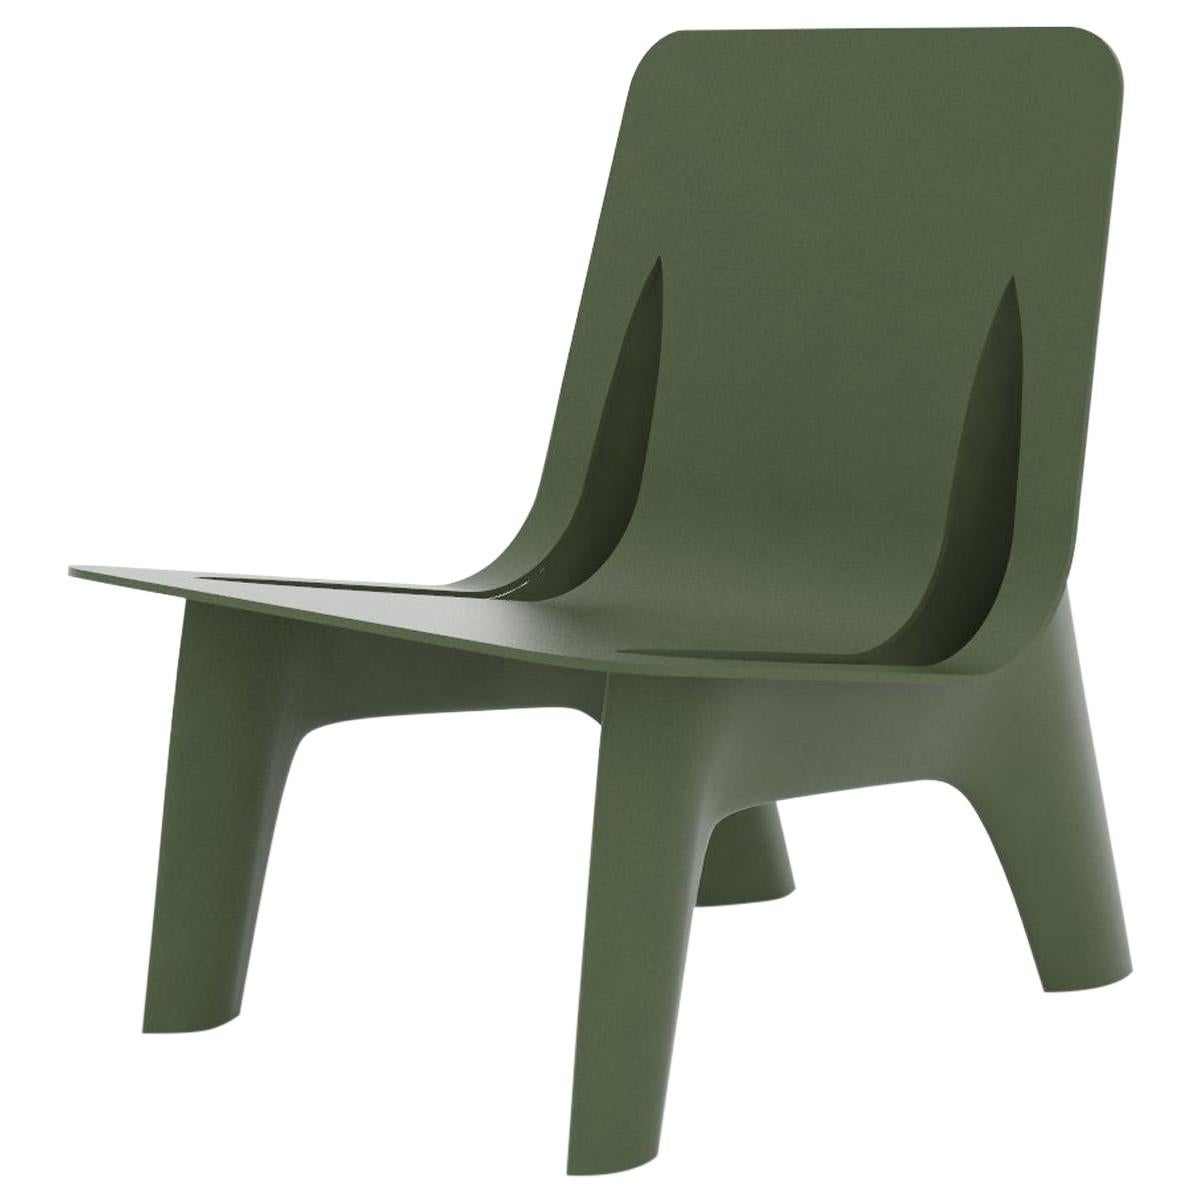 J-Chair Lounge Polished Olive Green Color Carbon Steel Seating by Zieta For Sale